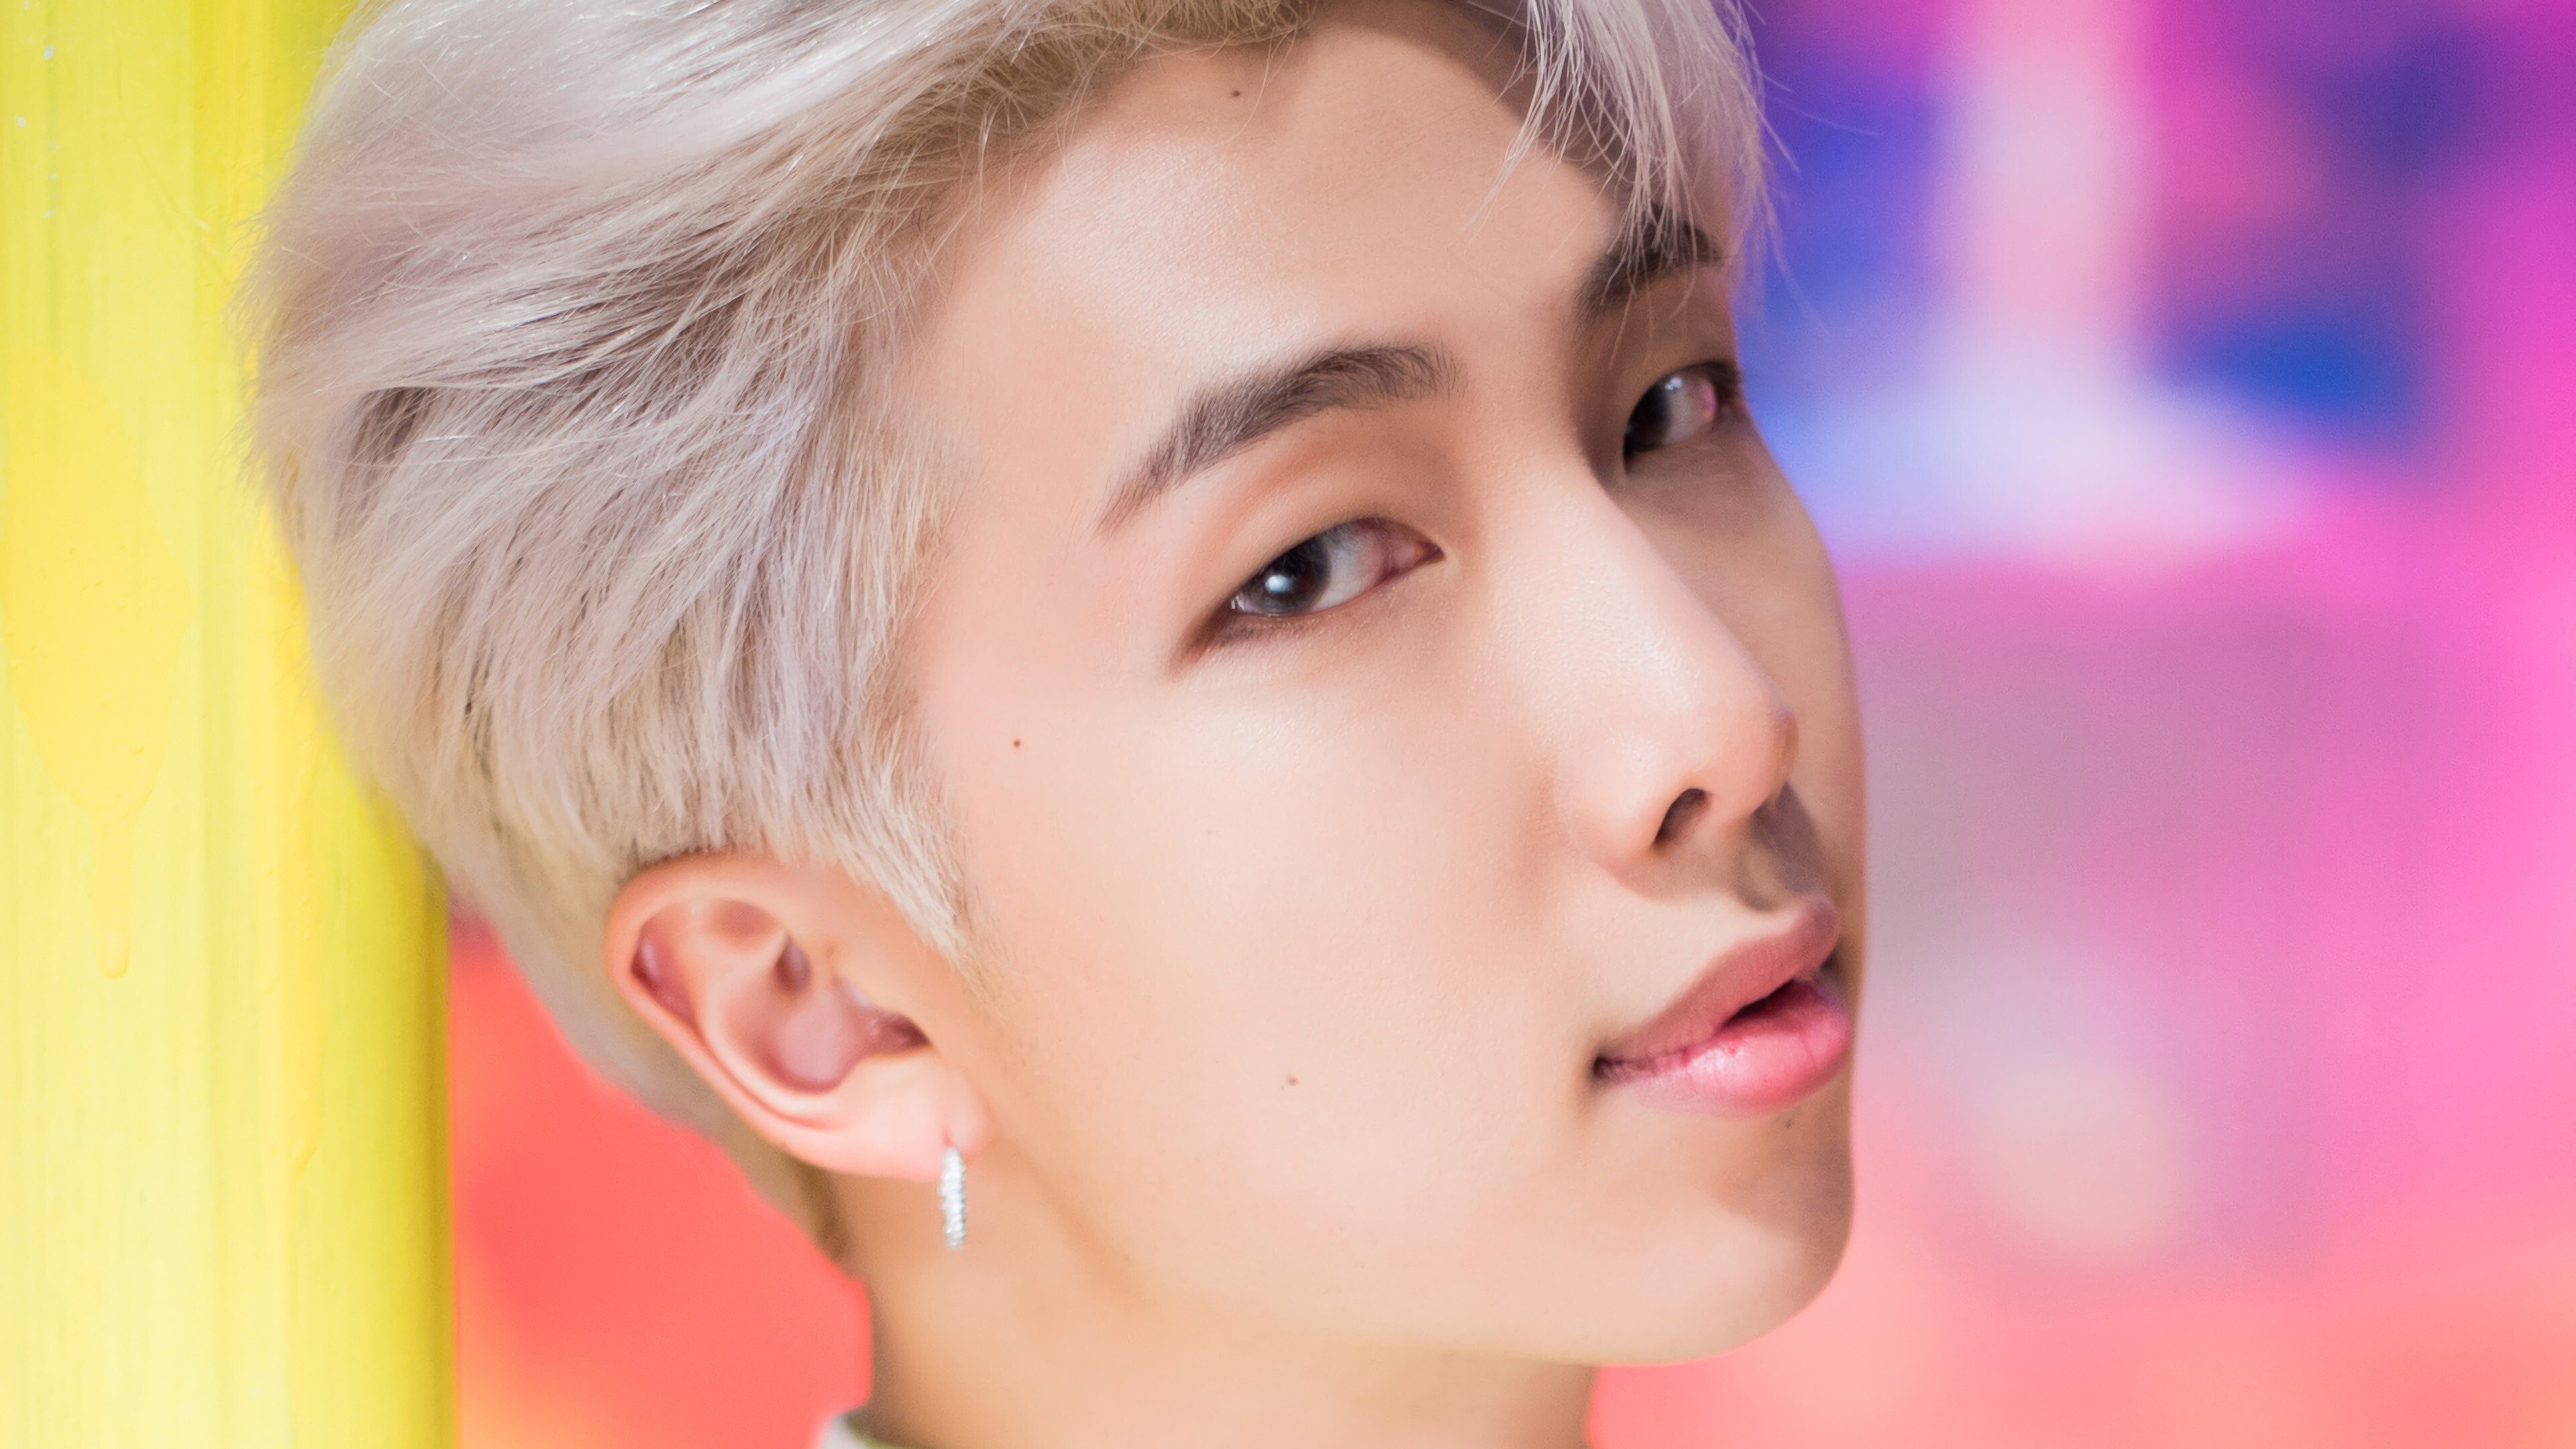 Bts Members Rm, Suga And J-Hope'S Solo Projects Guide: The Mixtapes That  Express Their Individual Styles And Personalities | South China Morning Post